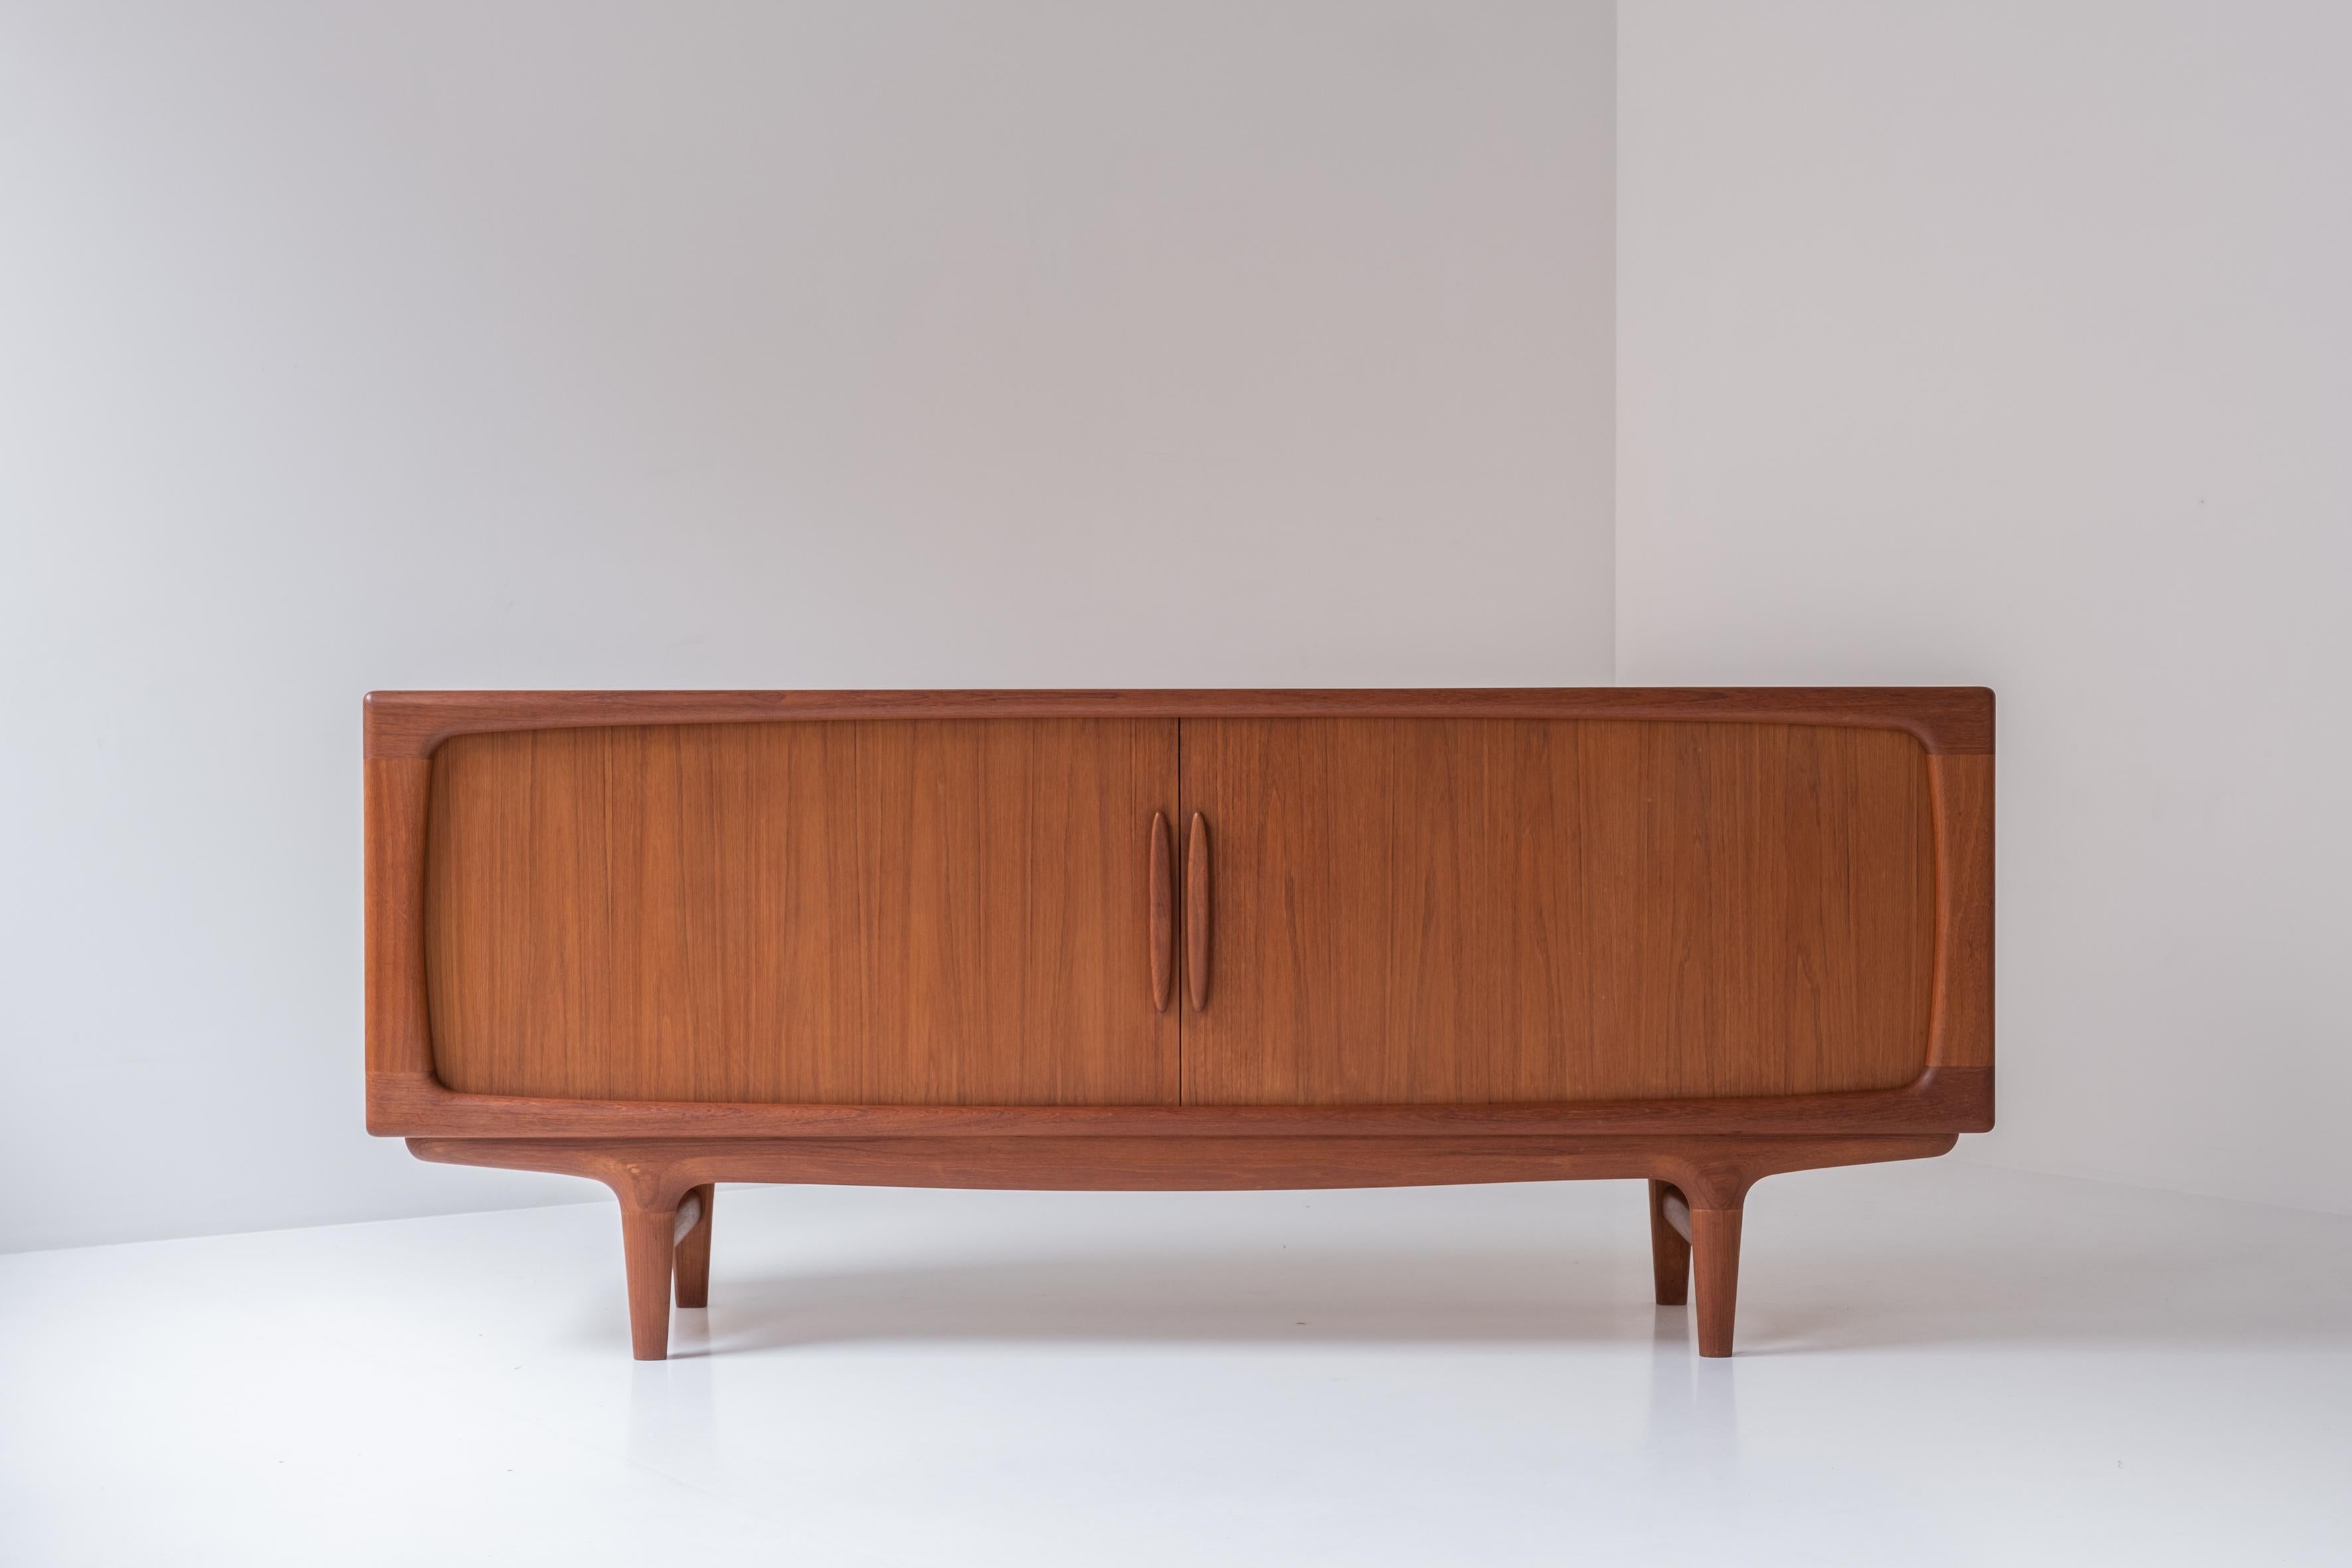 Elegant sideboard by Johannes Andersen for Falster, Denmark 1960s. This sideboard is made out of teak and features tambour sideboards covering a series of adjustable shelves and drawers inside. Very well presented condition. Labeled inside.